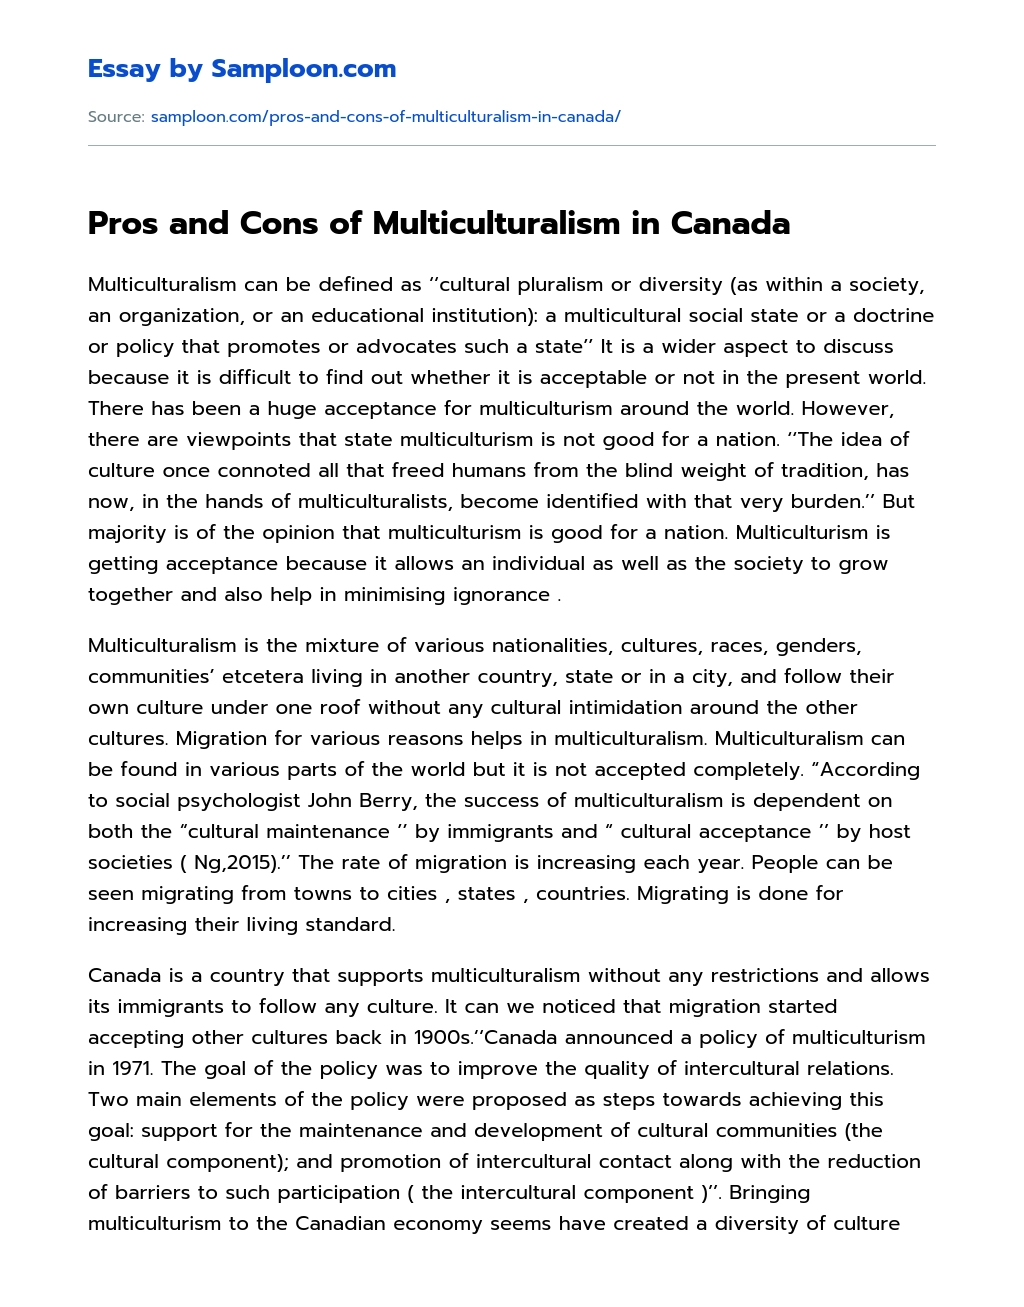 Pros and Cons of Multiculturalism in Canada essay